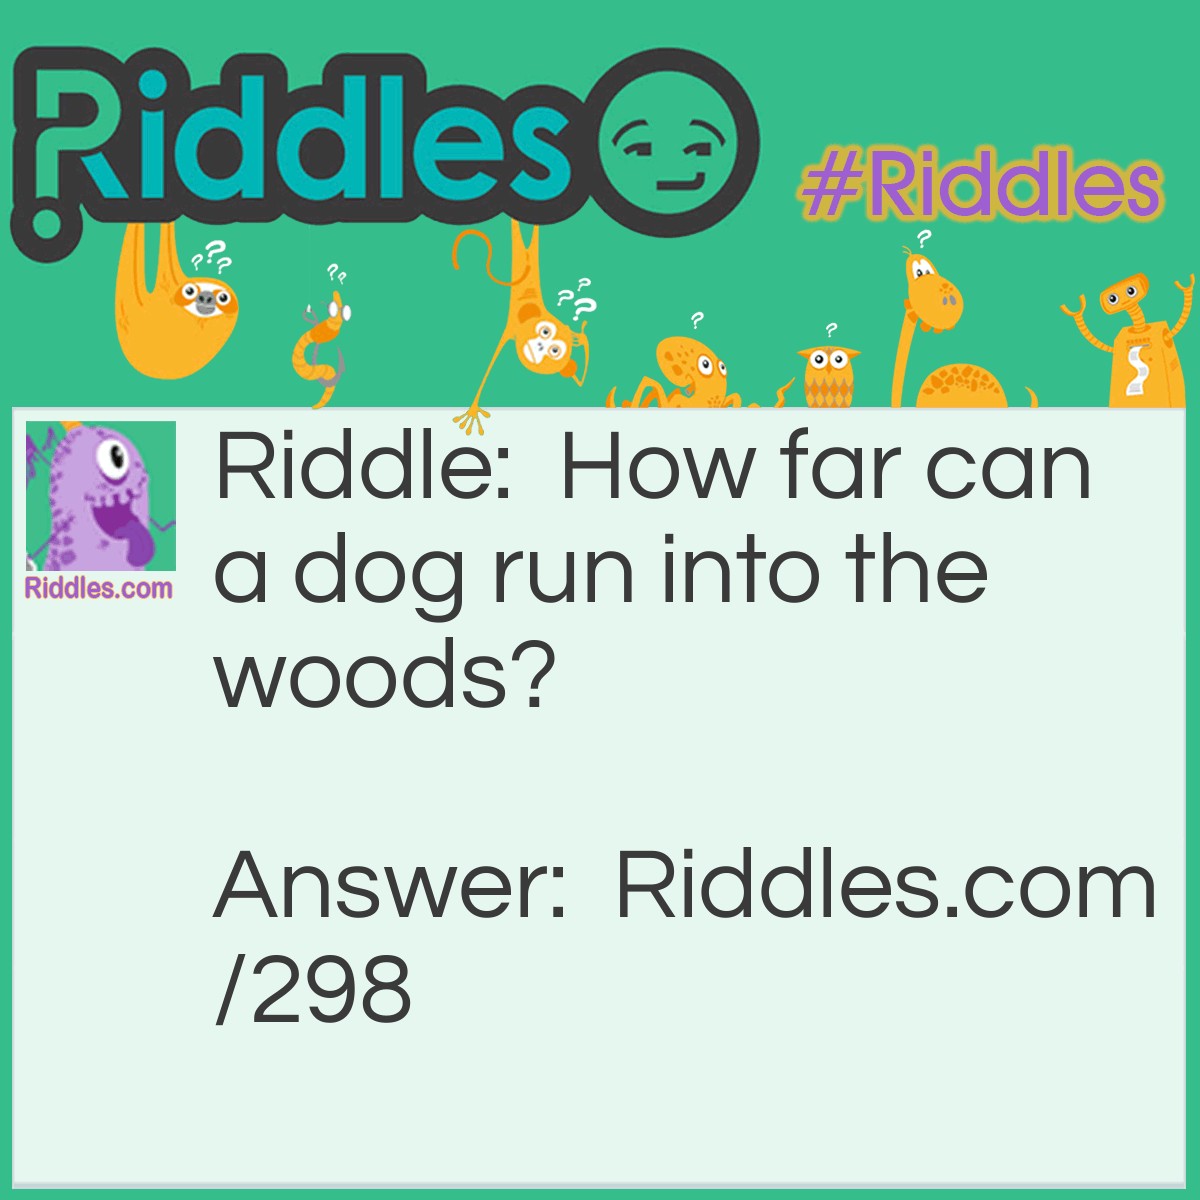 Riddle: How far can a dog run into the woods? Answer: Halfway, any farther and he would be running out of the woods.